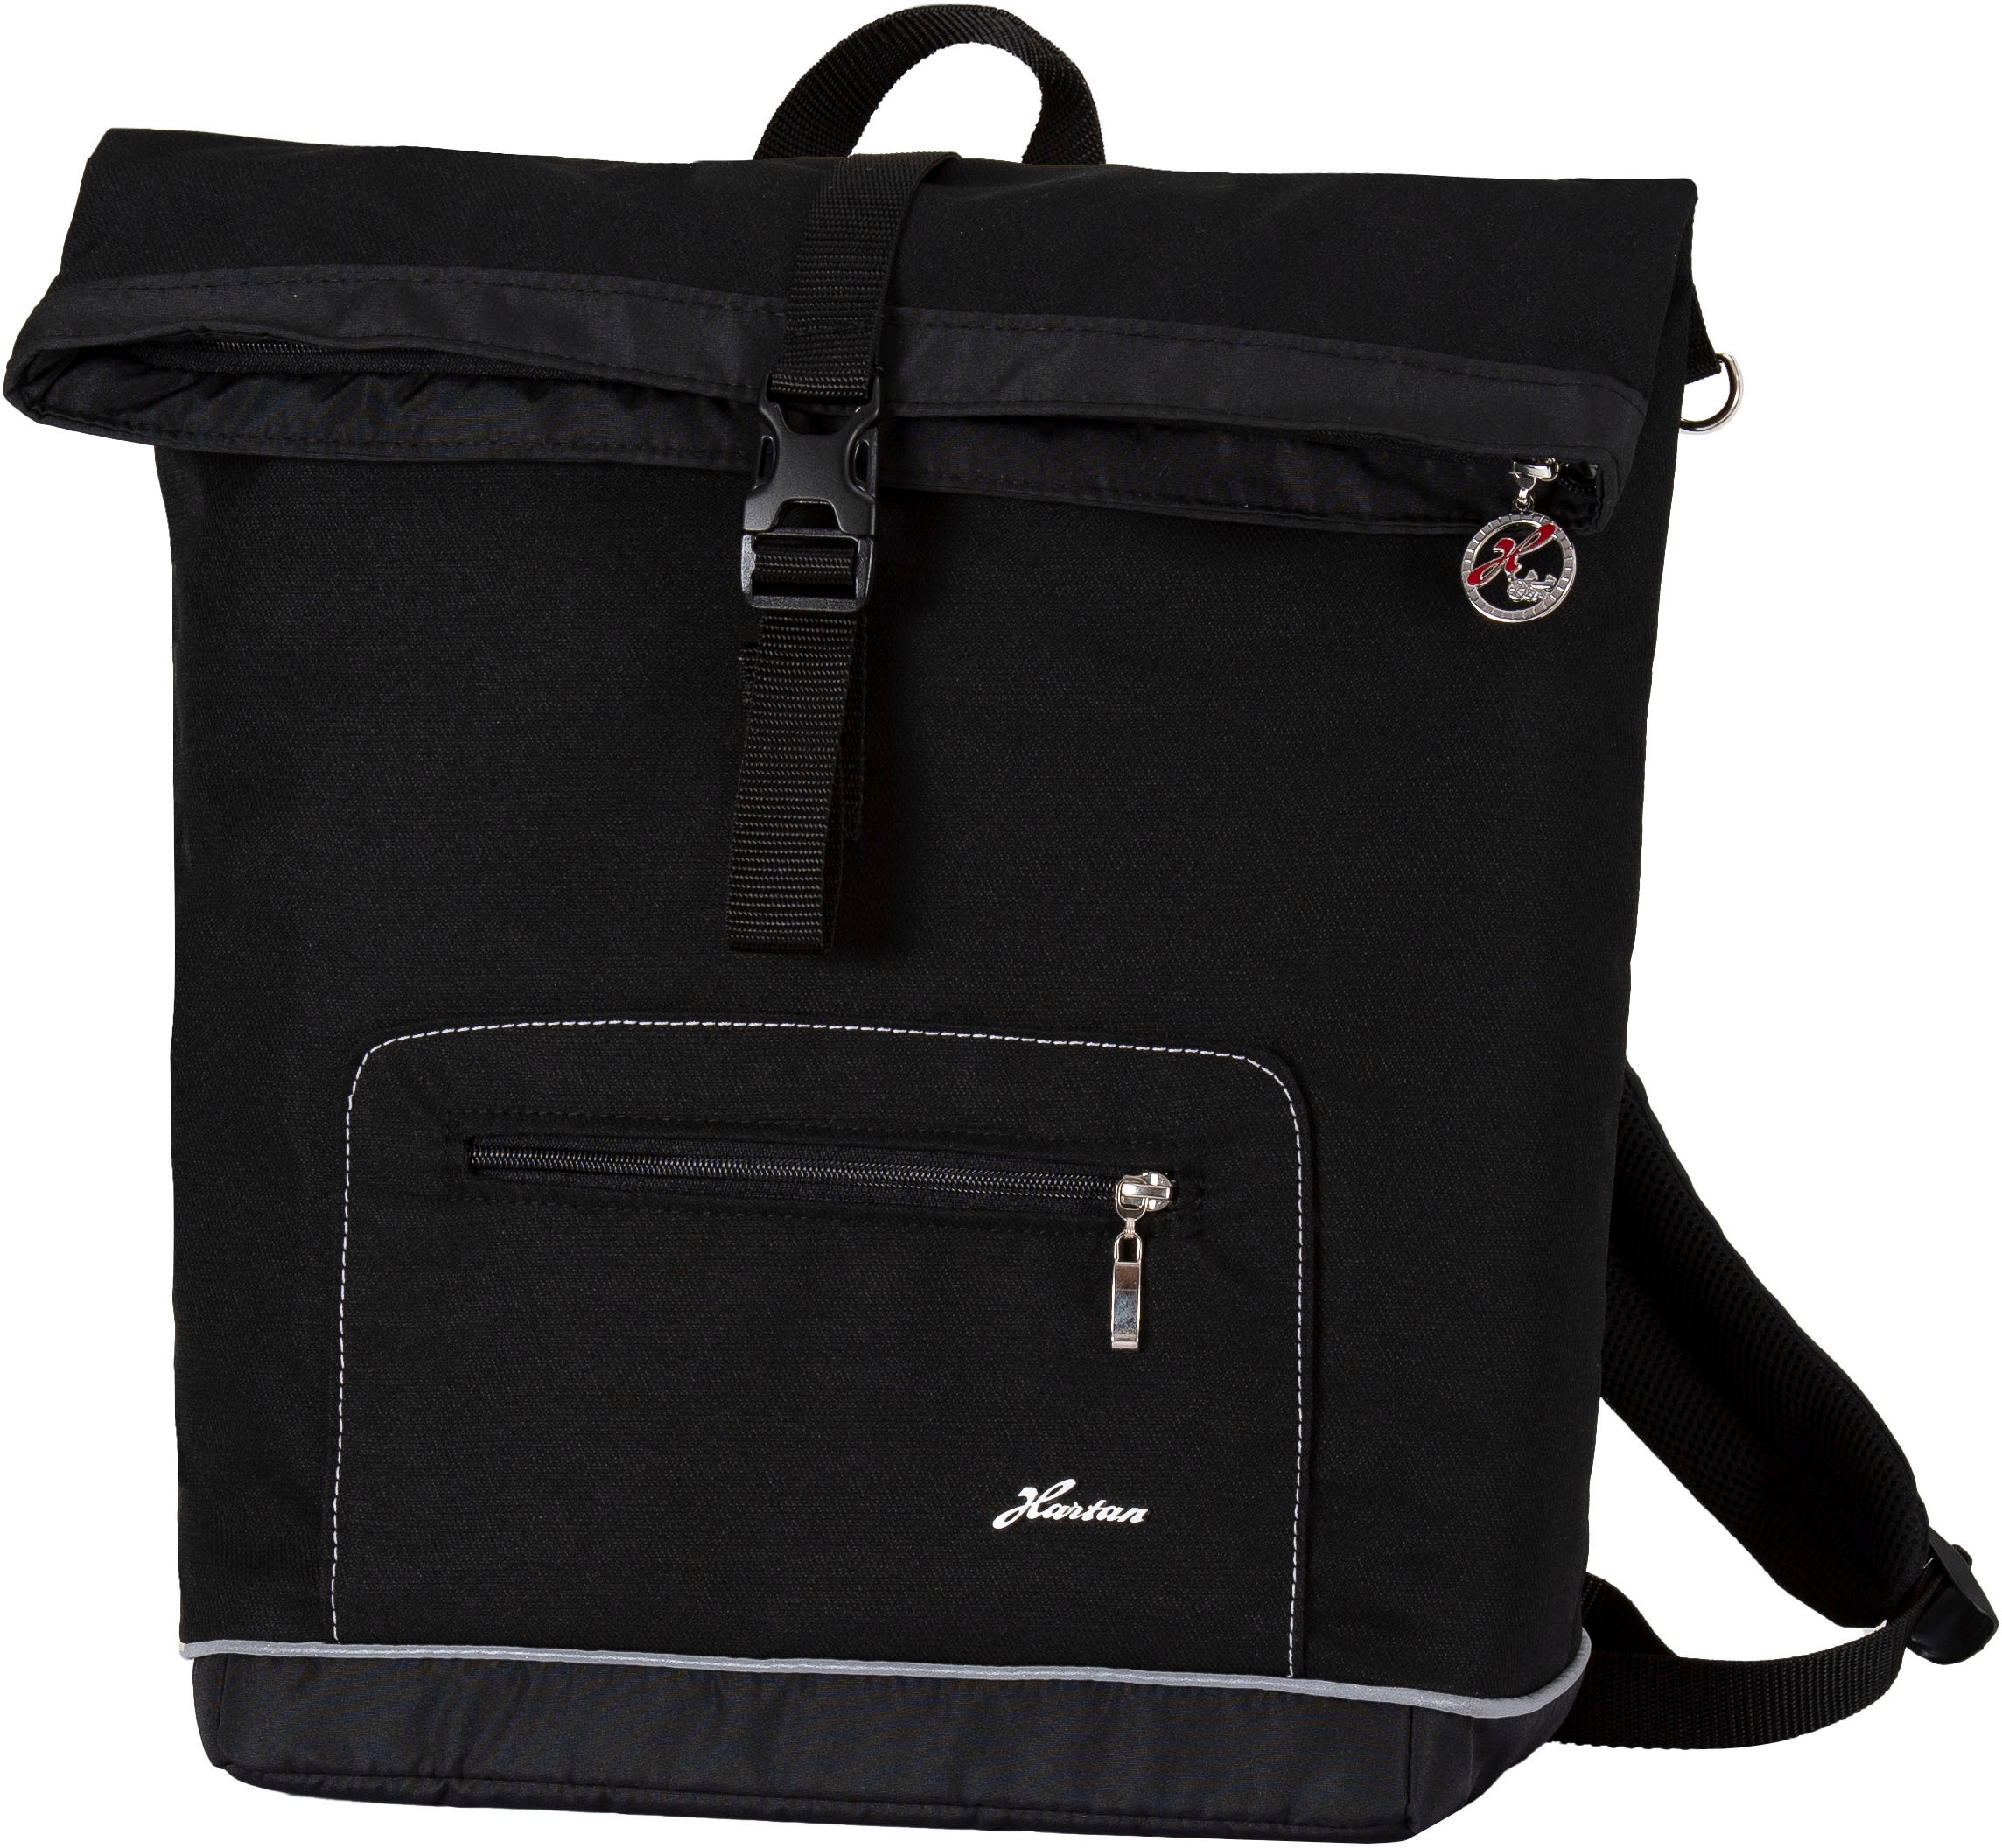 Wickelrucksack »Space bag - Casual Collection«, mit Thermofach; Made in Germany